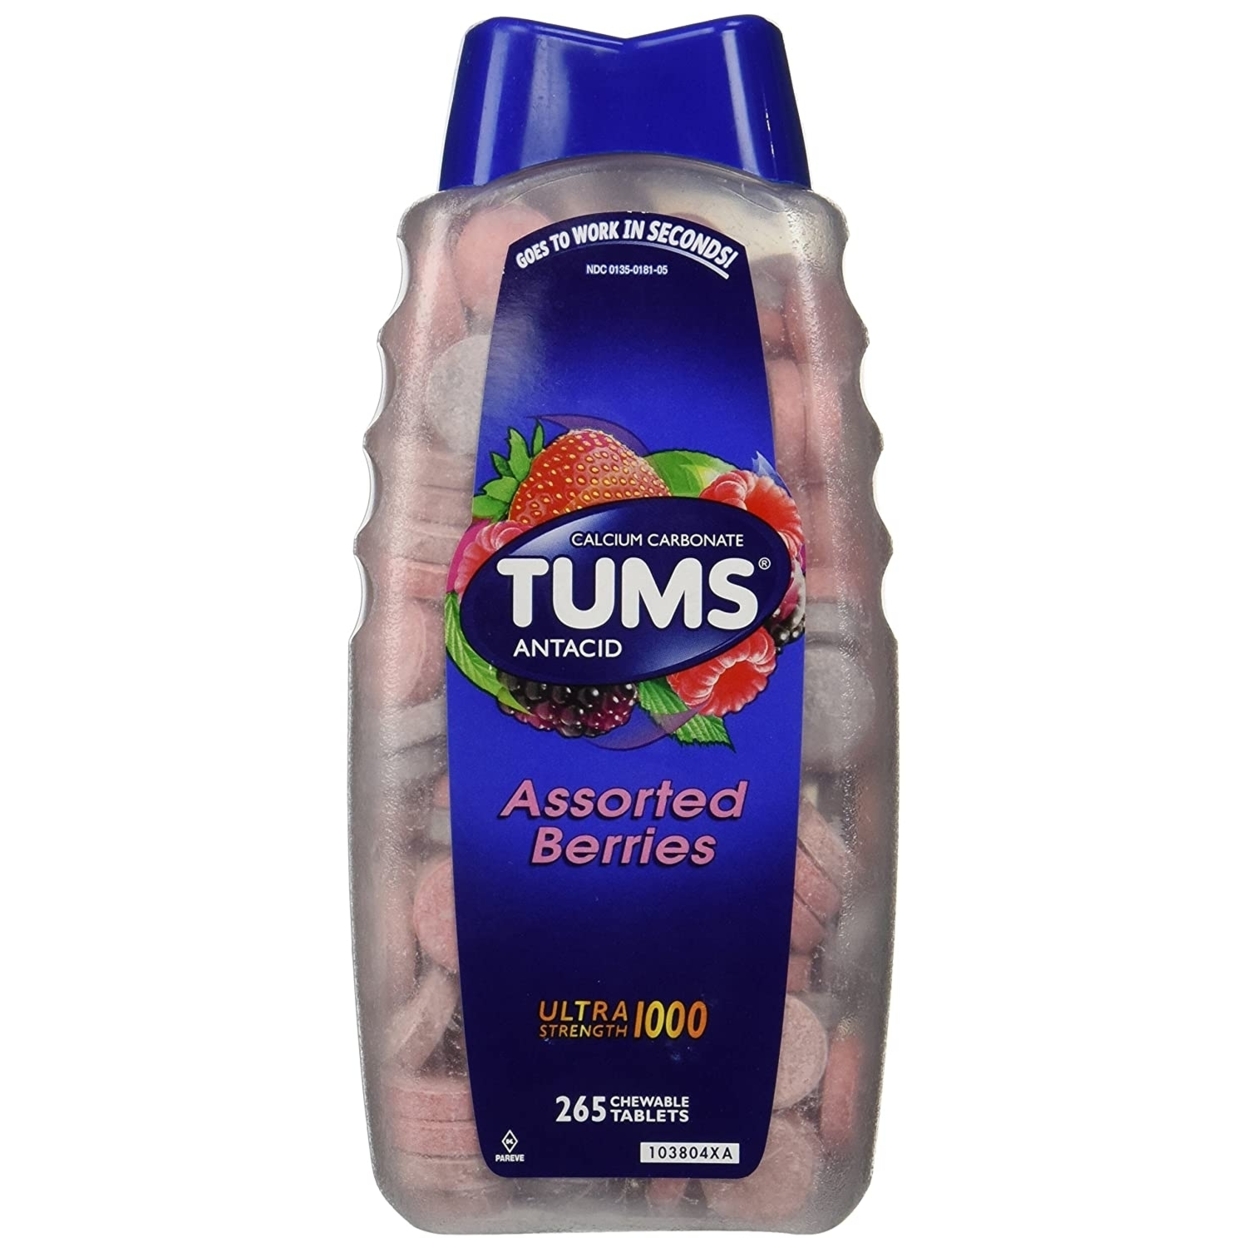 Tums Ultra Assorted Berries 265 Tablets